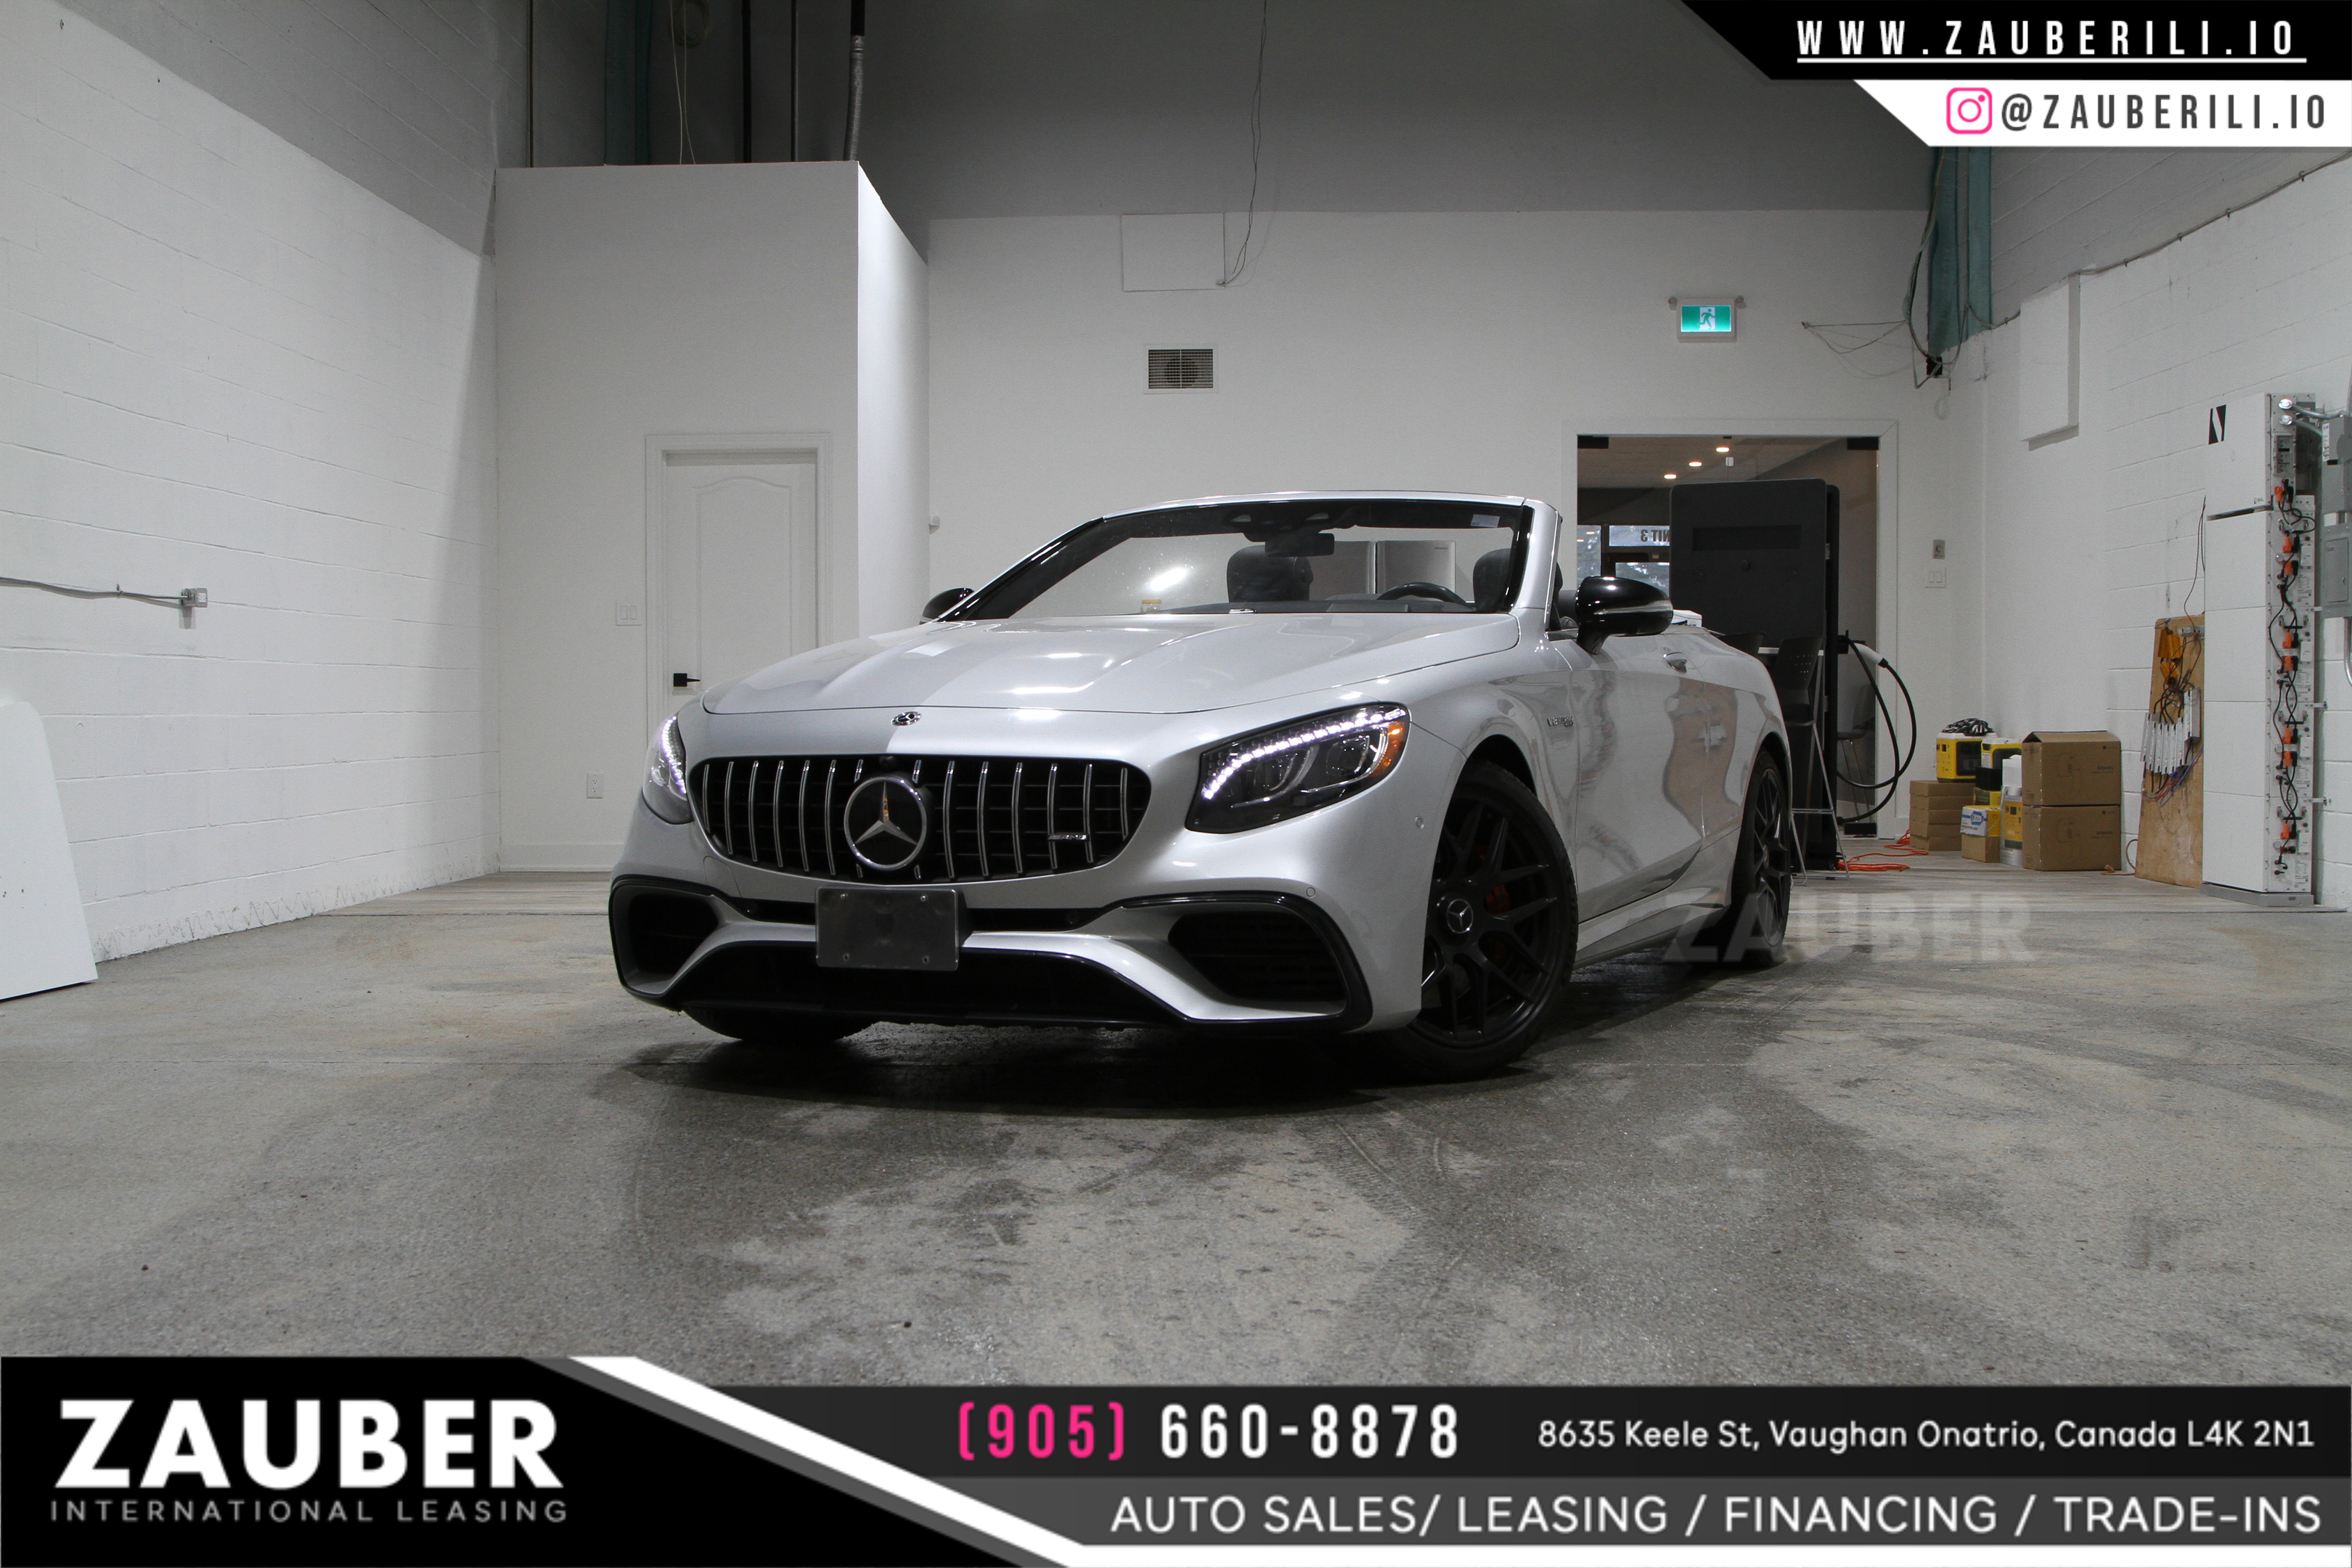 2019 Mercedes-Benz S-Class AMG S 63 4MATIC+ Cabriolet